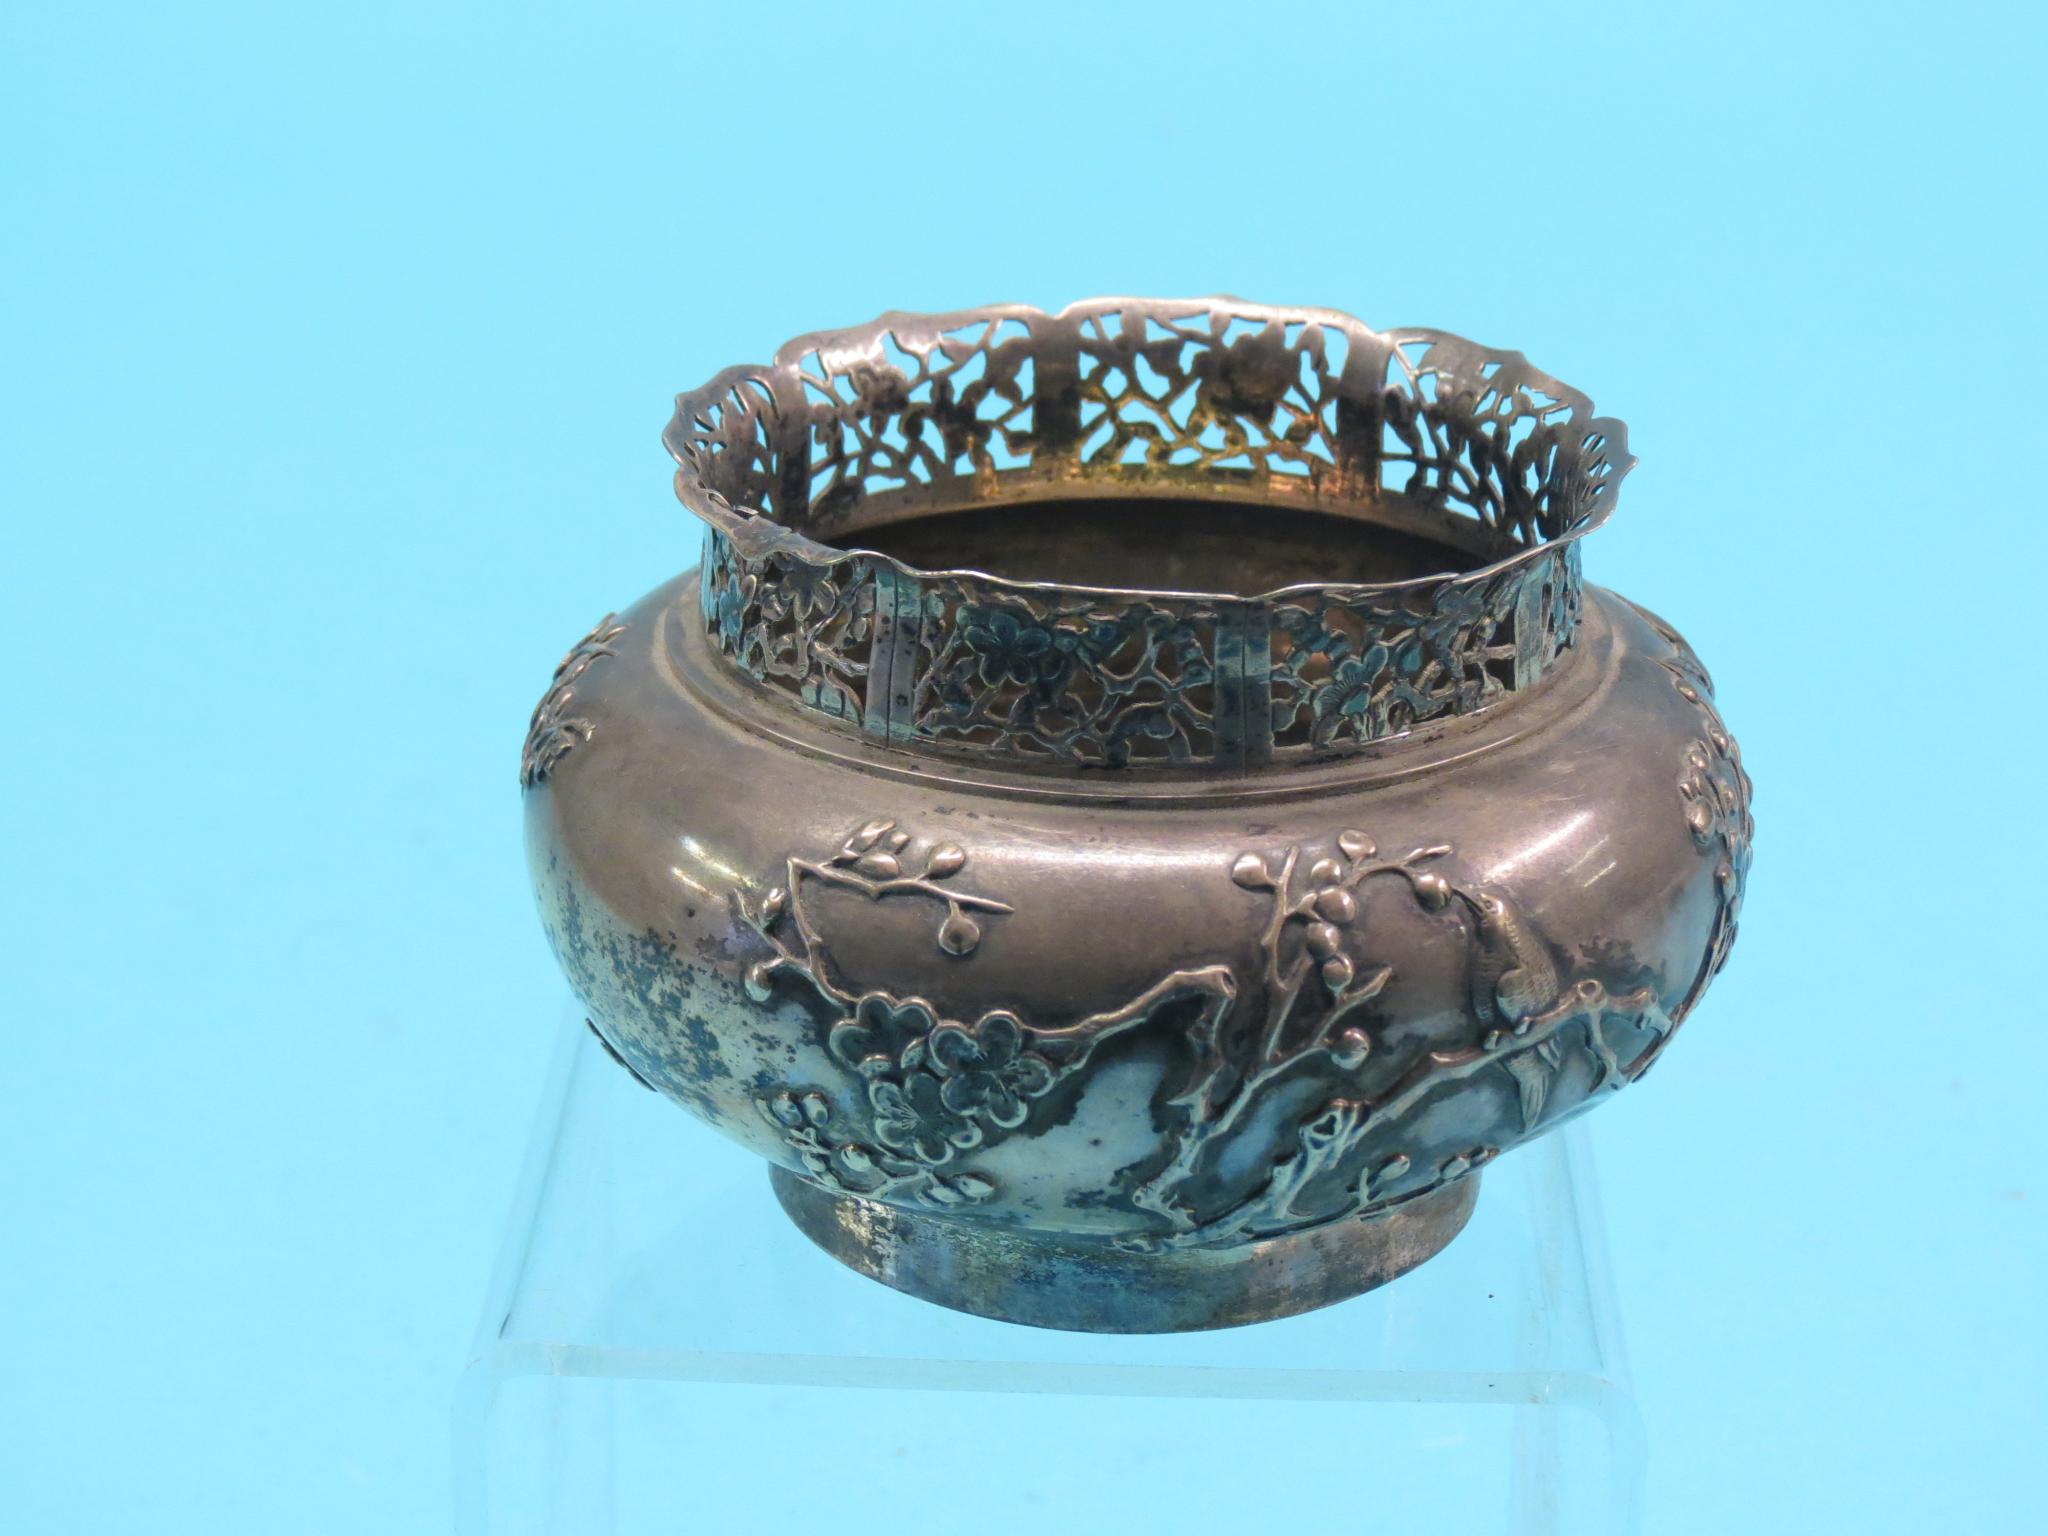 A Chinese silver bowl, cast with birds and foliage, 4.5in. diameter, an Indian silver posy vase - Image 5 of 6